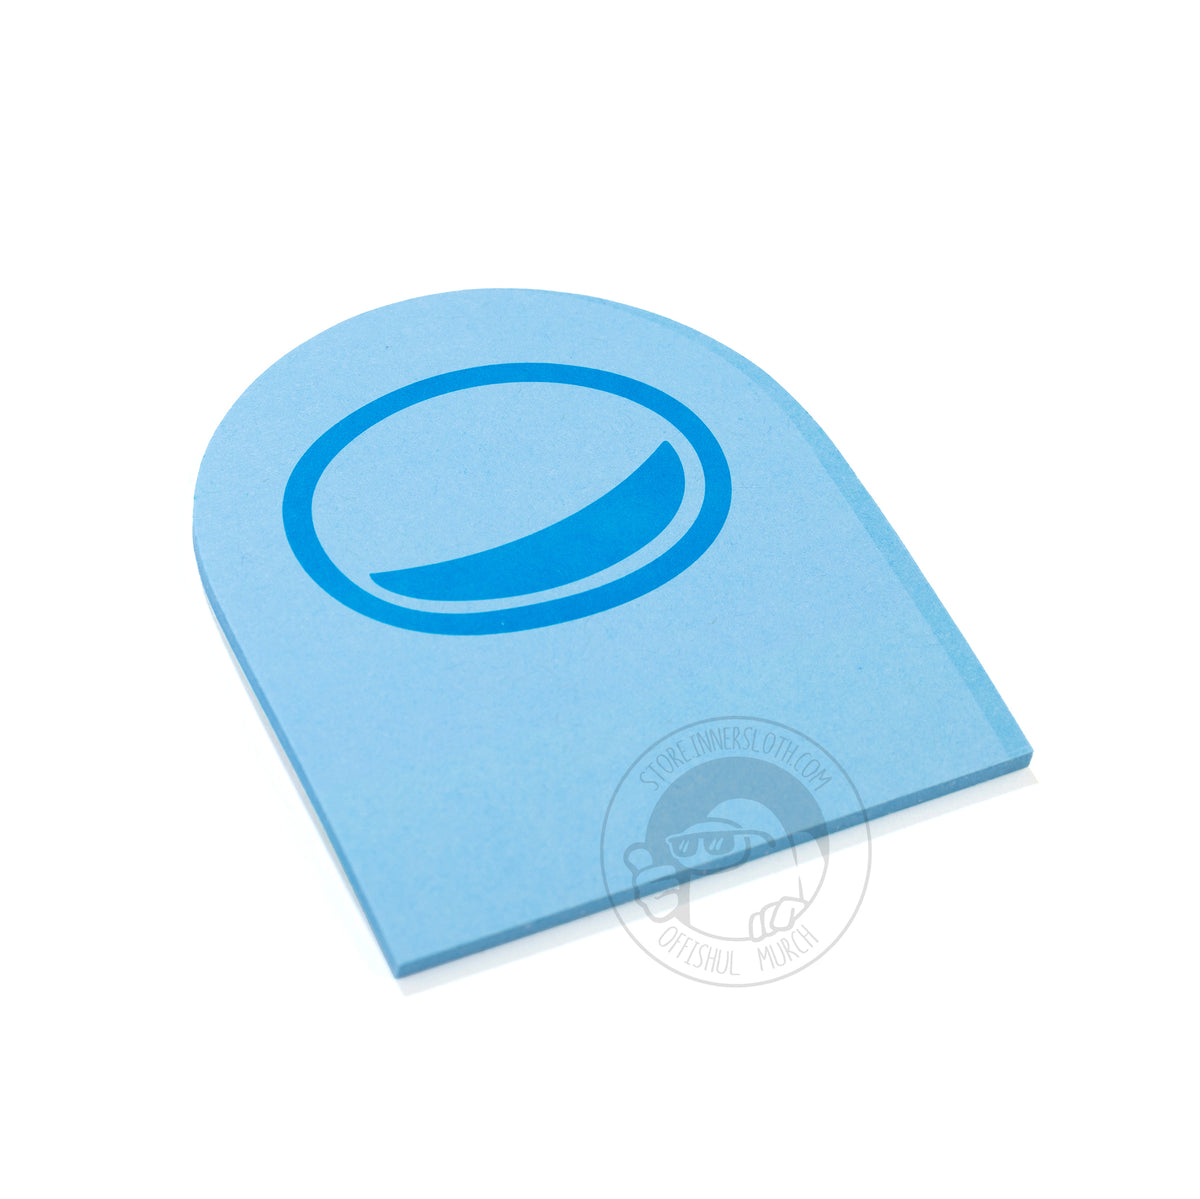 A product photo of the blue pack of Crewmate Post-It Notes placed diagonally.